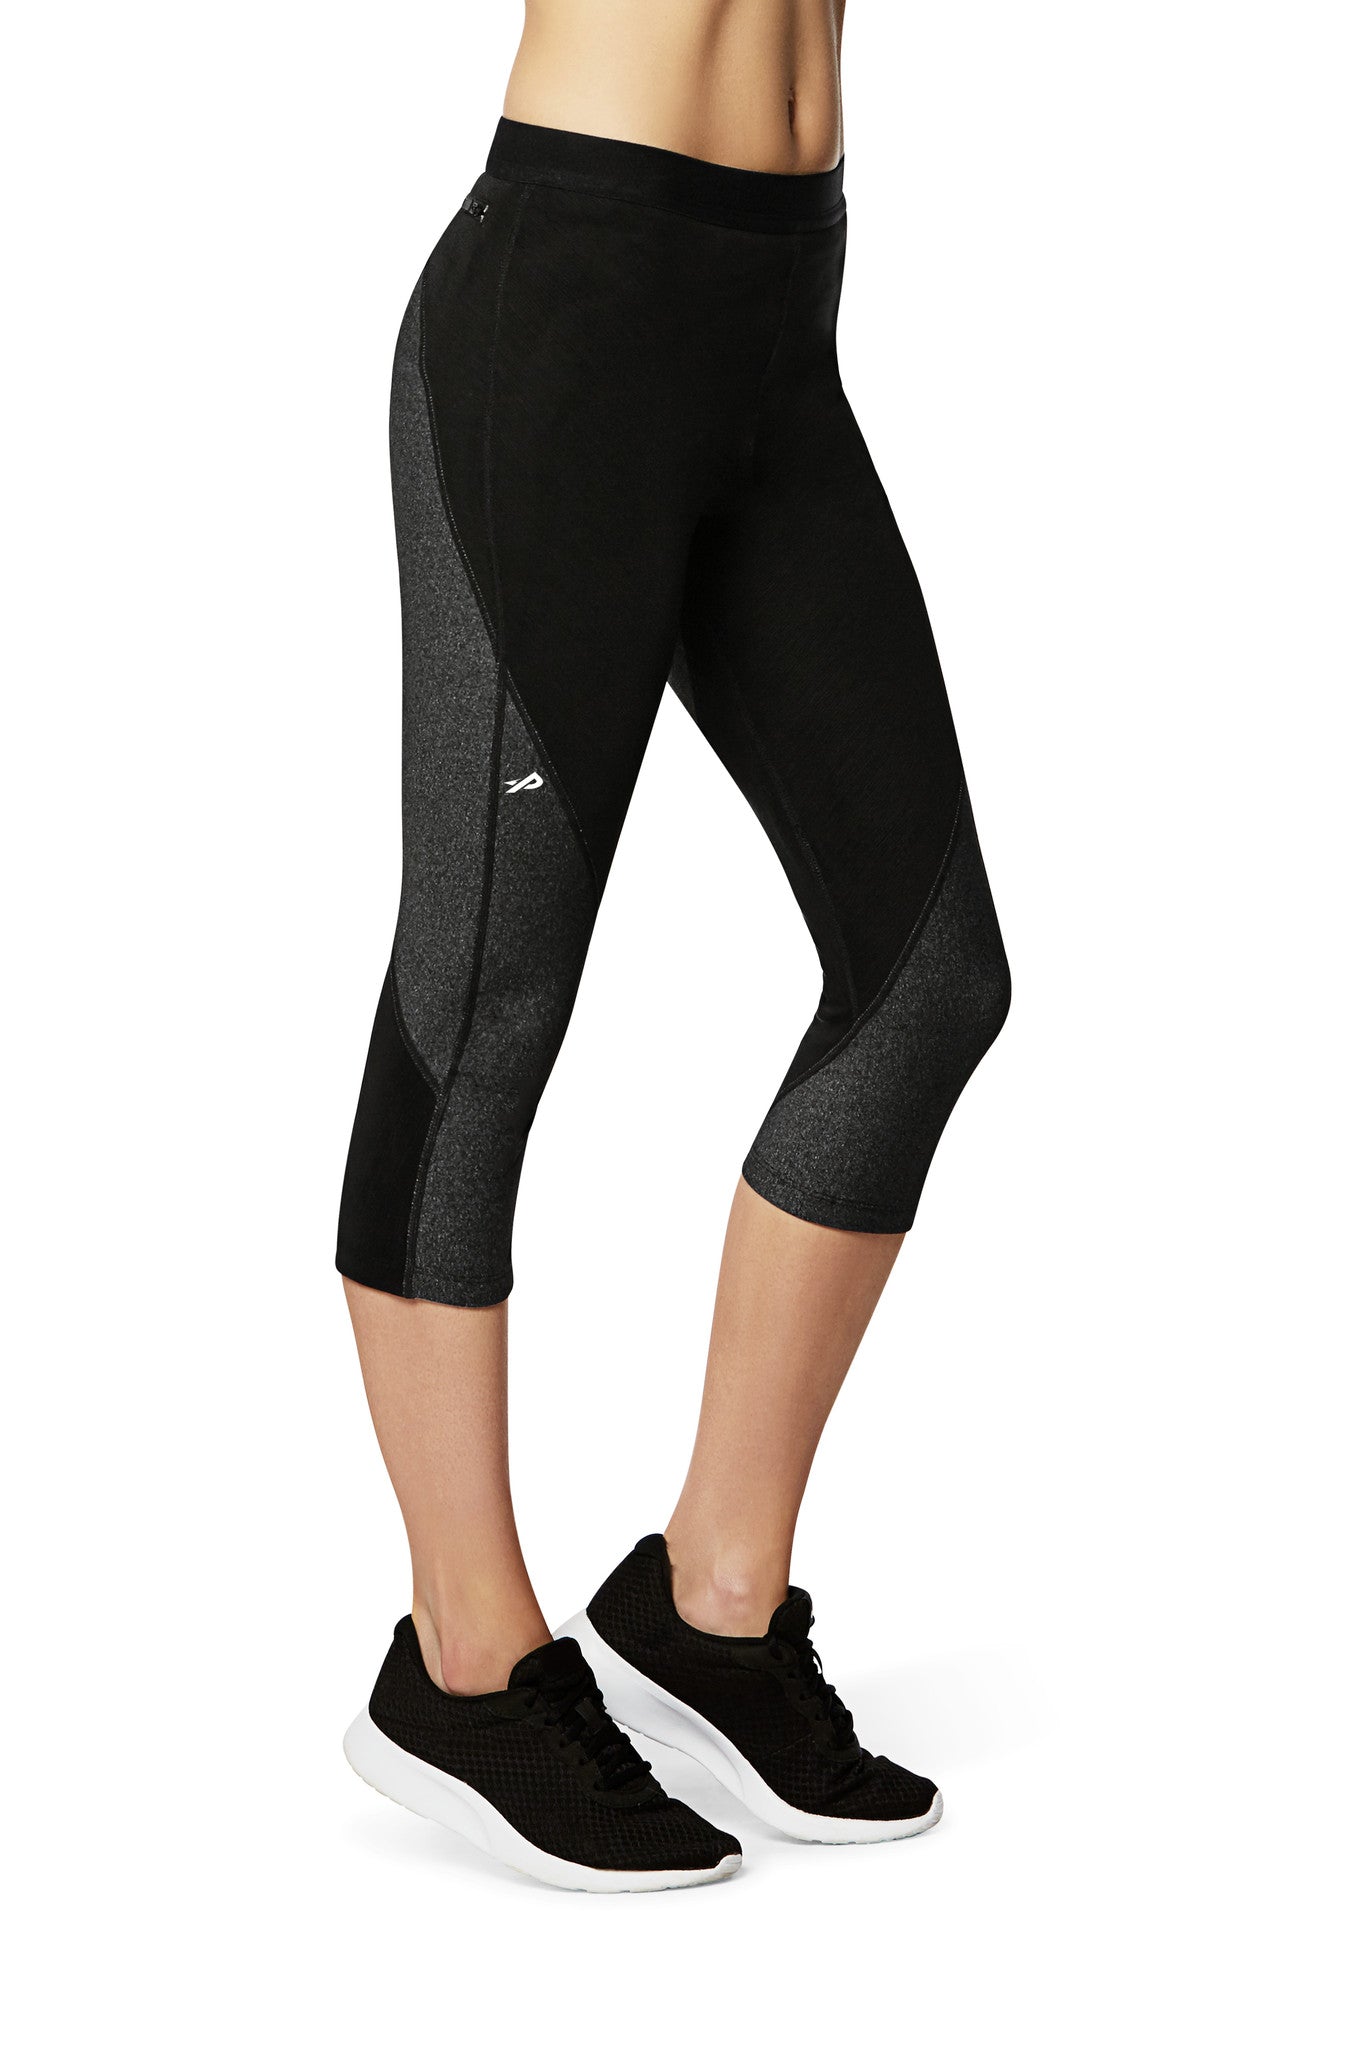 Pro Resistance Capris for Women - Athletic Grey – Physiclo